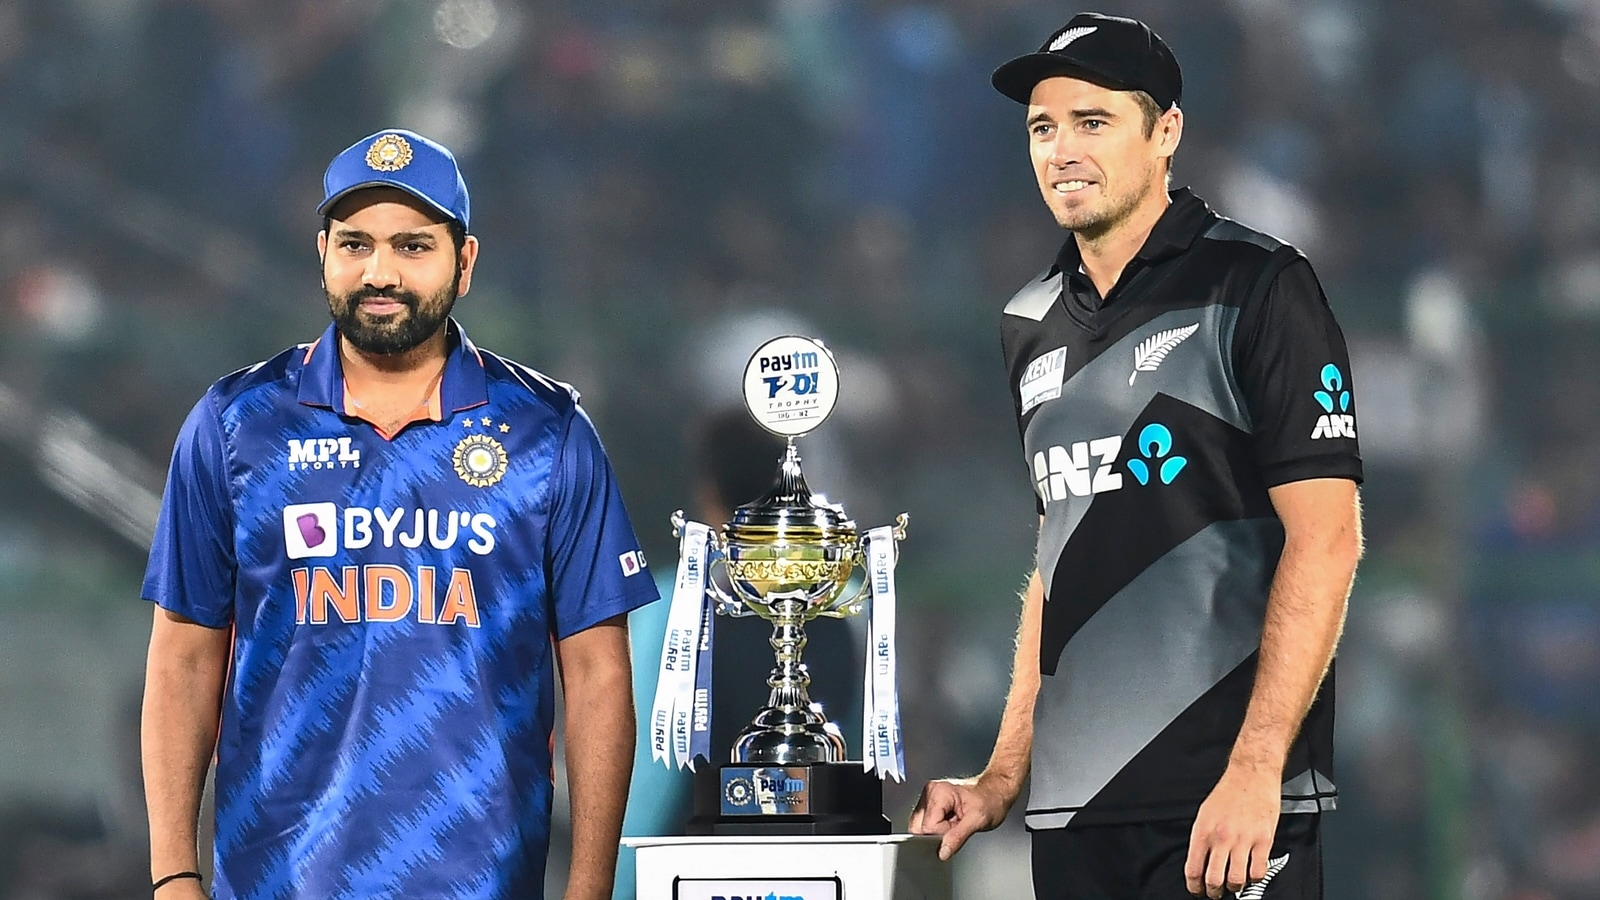 India vs New Zealand 2nd T20 Live Streaming When and Where to watch IND vs NZ 2nd T20I Live on TV and Online Cricket